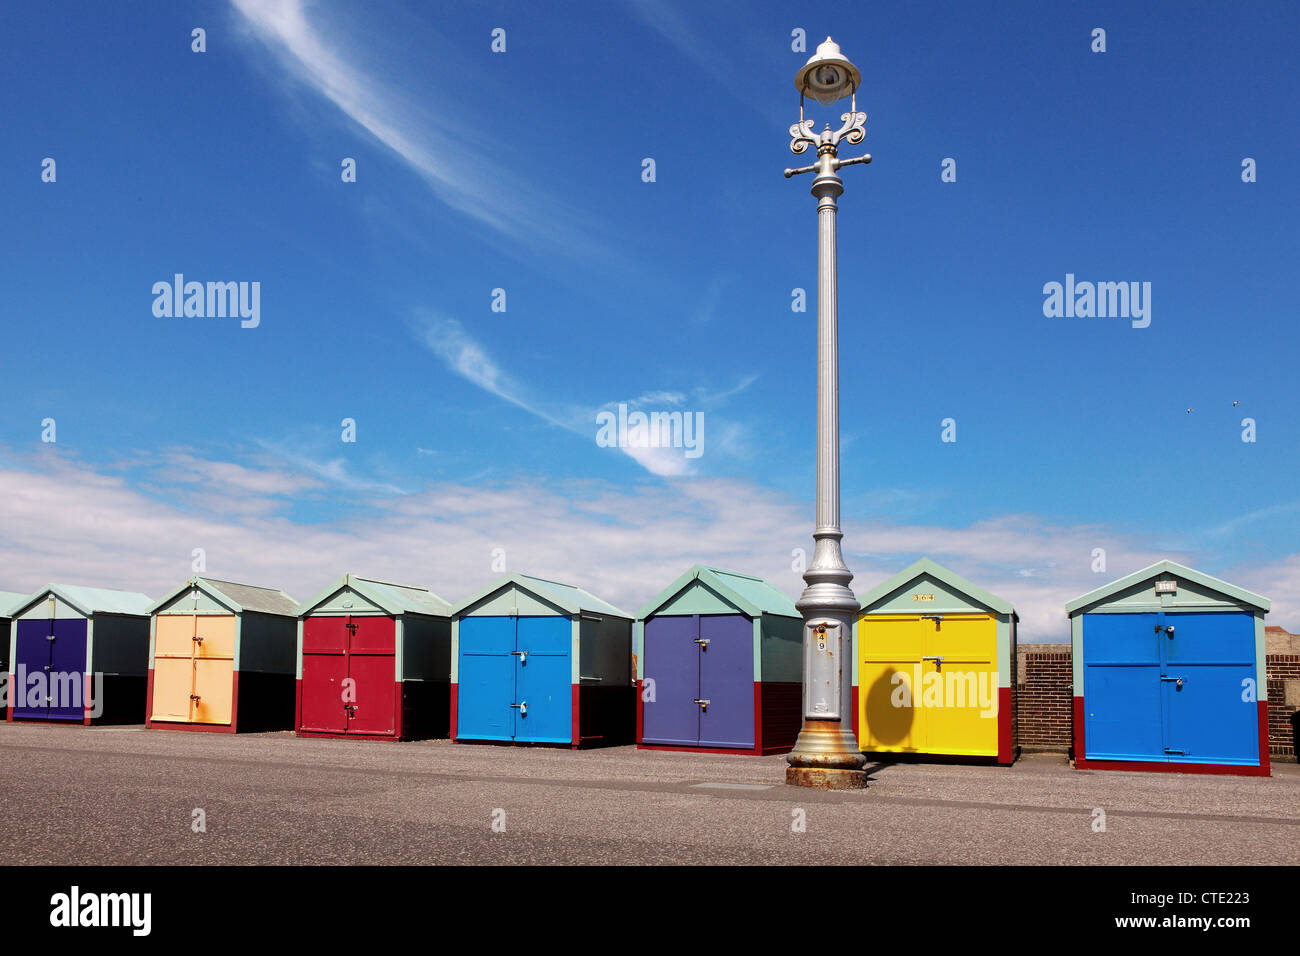 A row of beach huts with coloured doors and an old street lamp Stock Photo